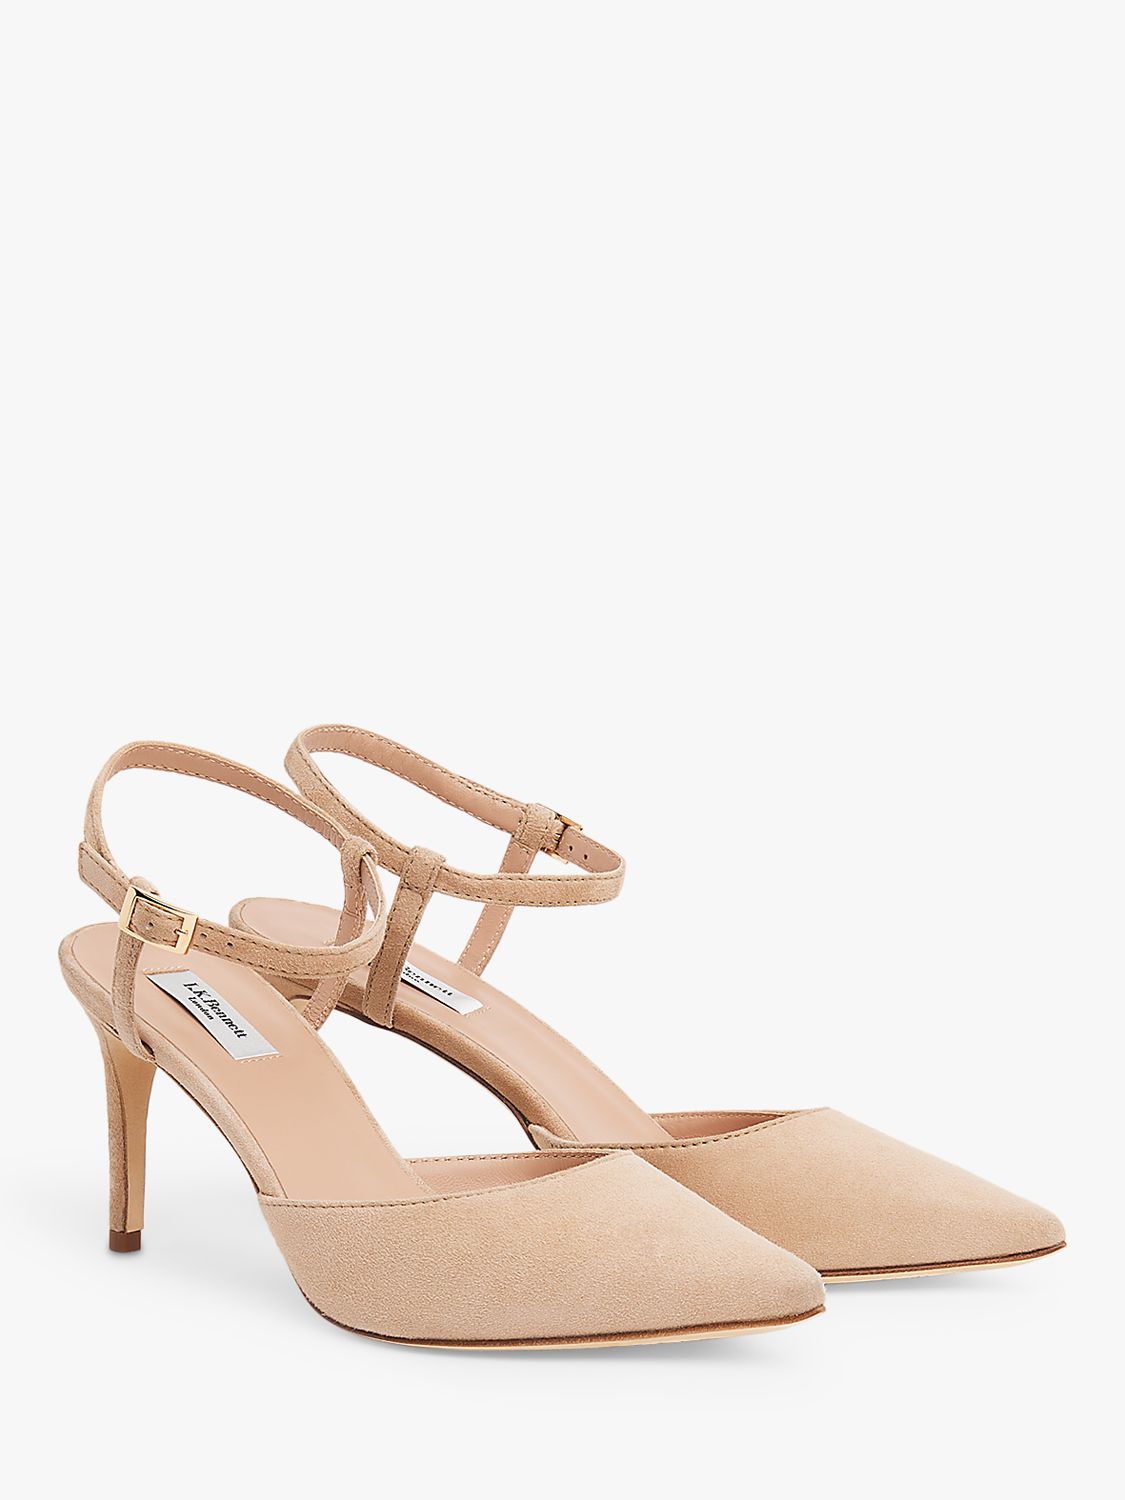 L.K.Bennett Hope Pointed Court Shoes, Natural at John Lewis & Partners